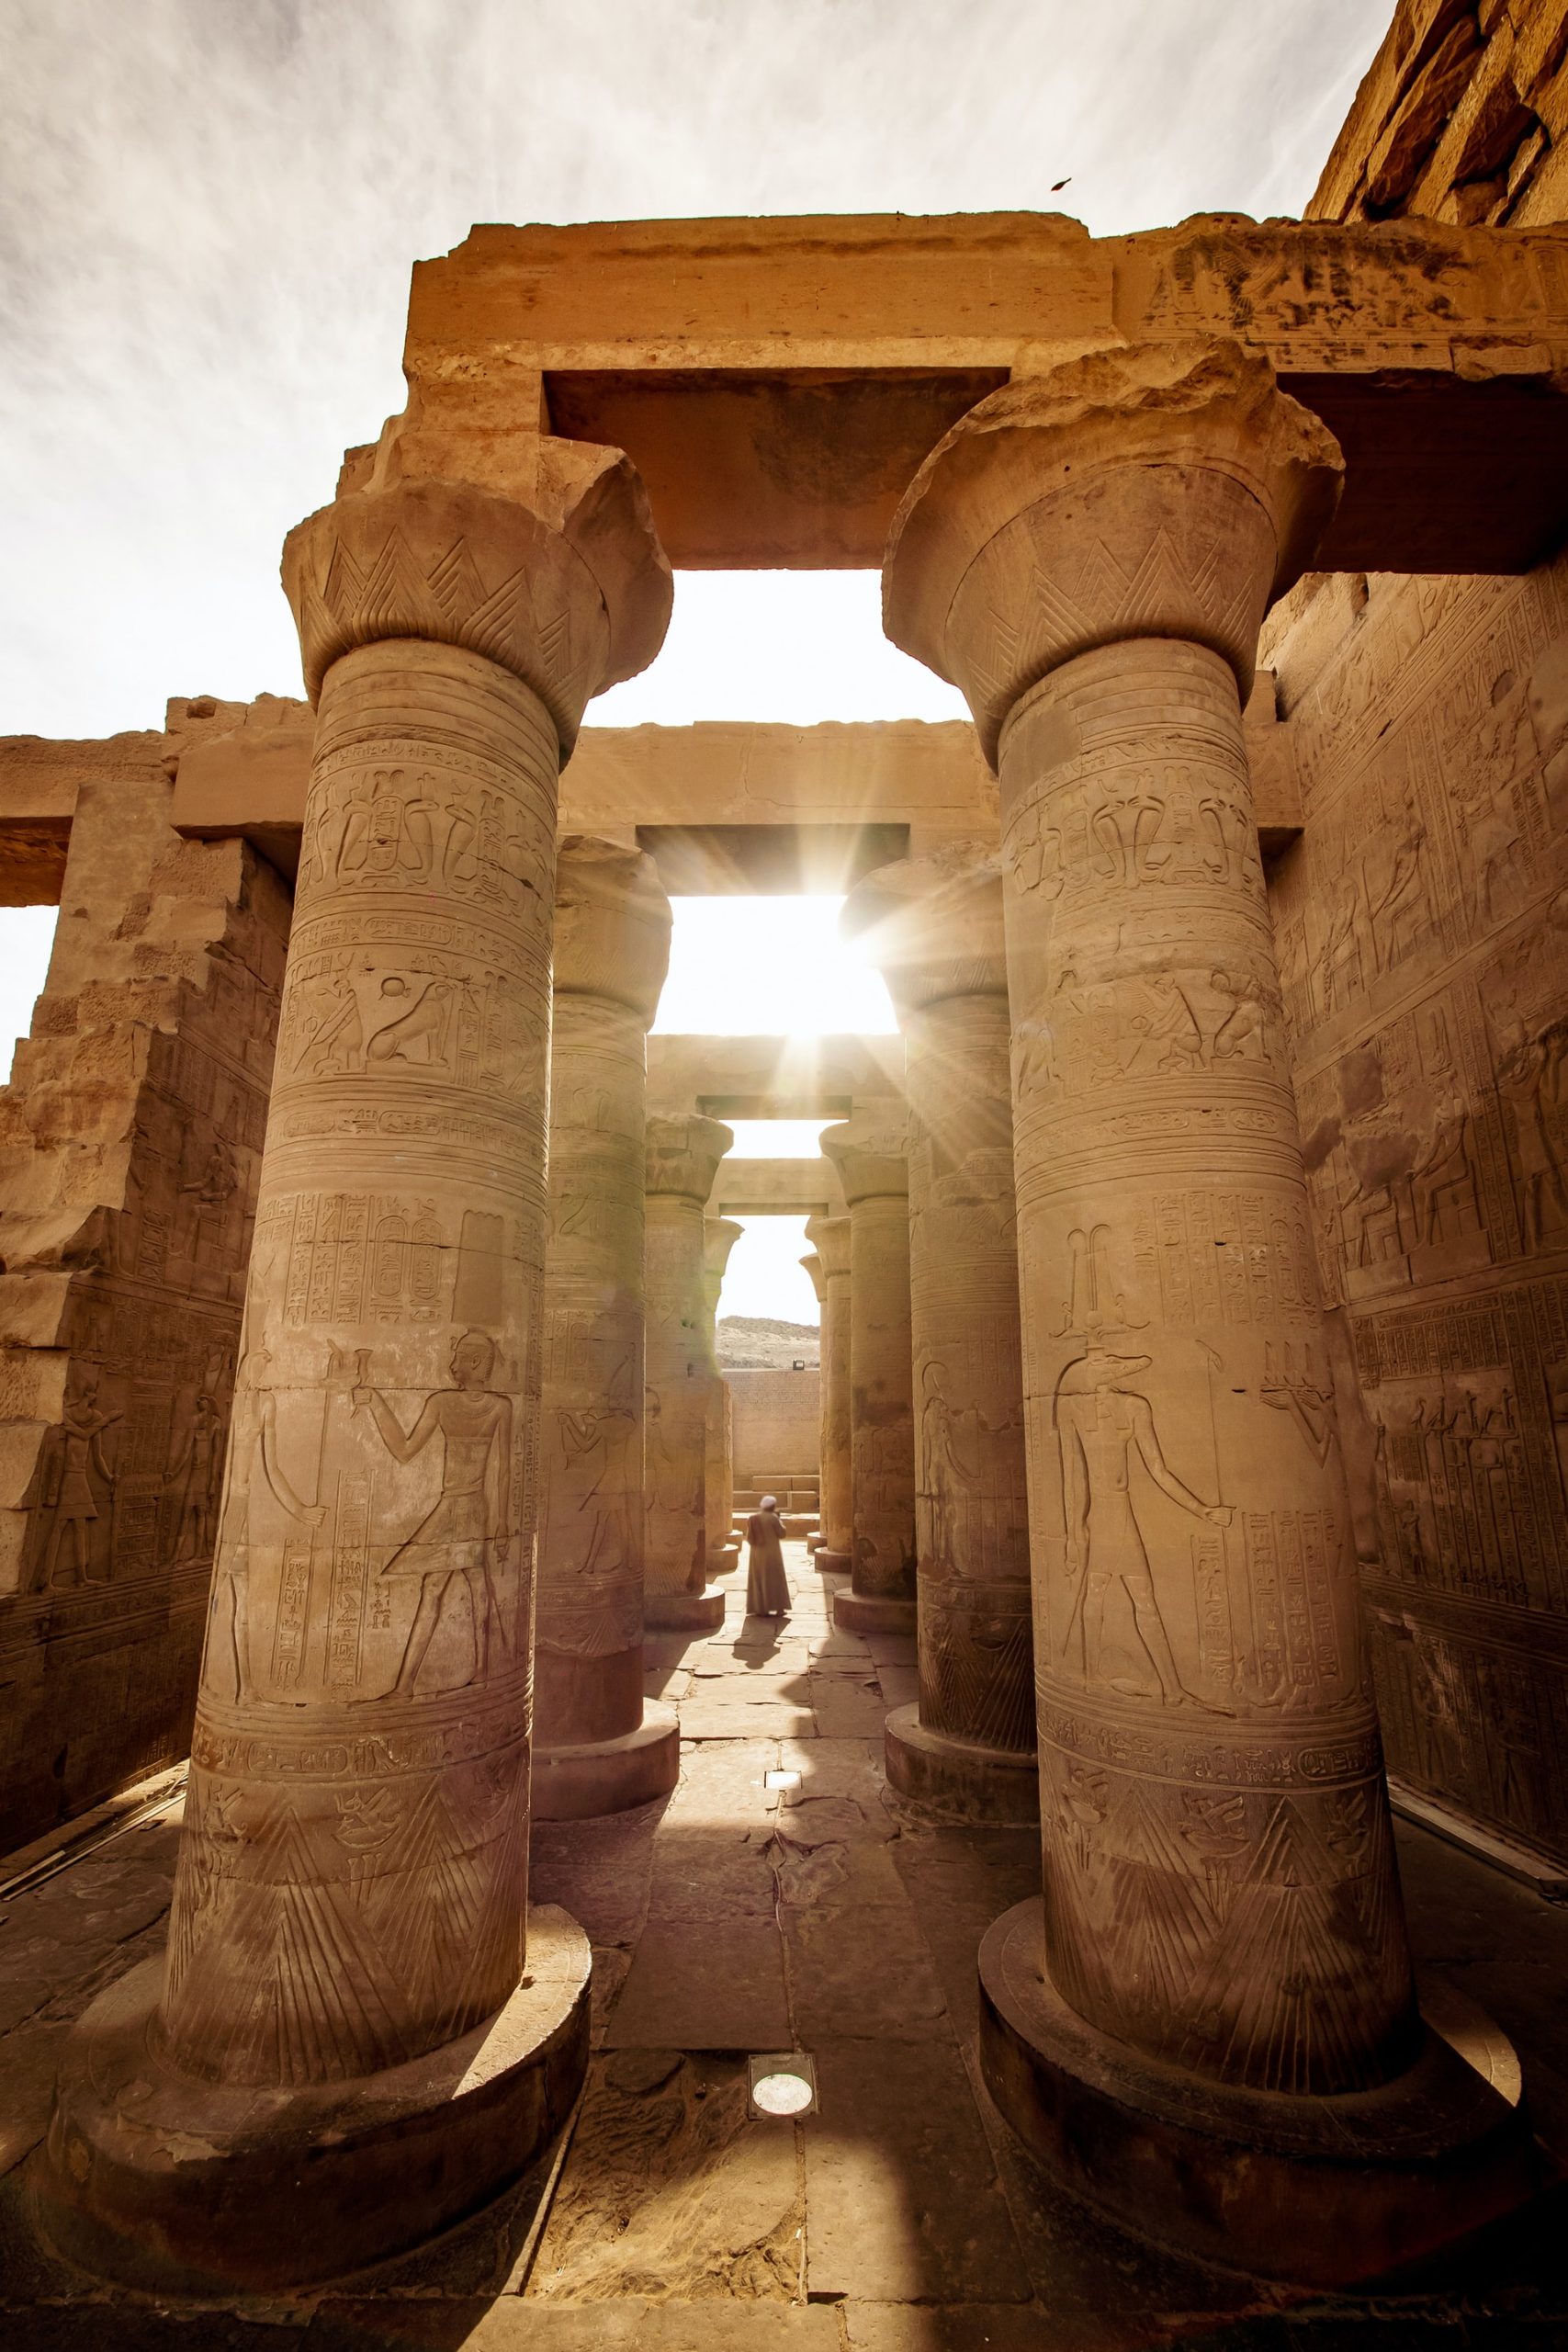 Luxor, Egypt. One of the must sees in Africa